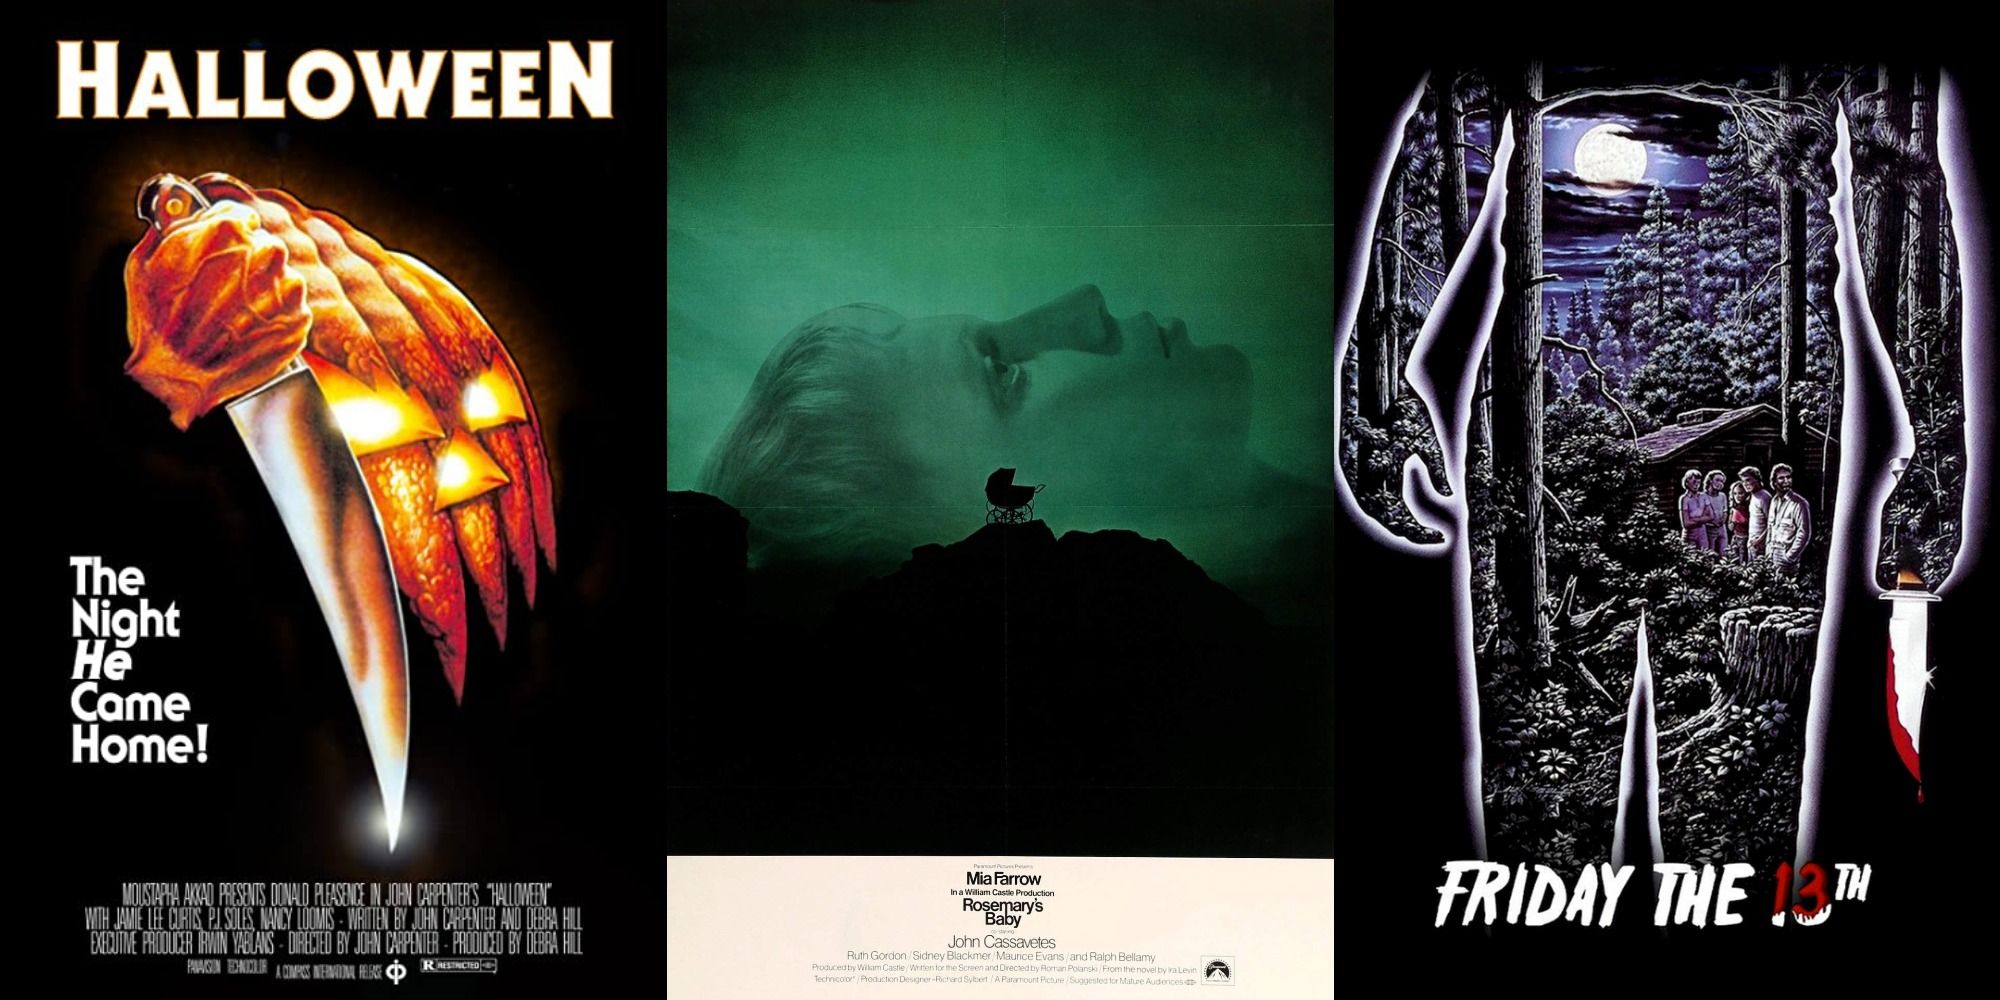 Split image showing posters for Halloween, Roesamry's Baby, and Friday the 13th